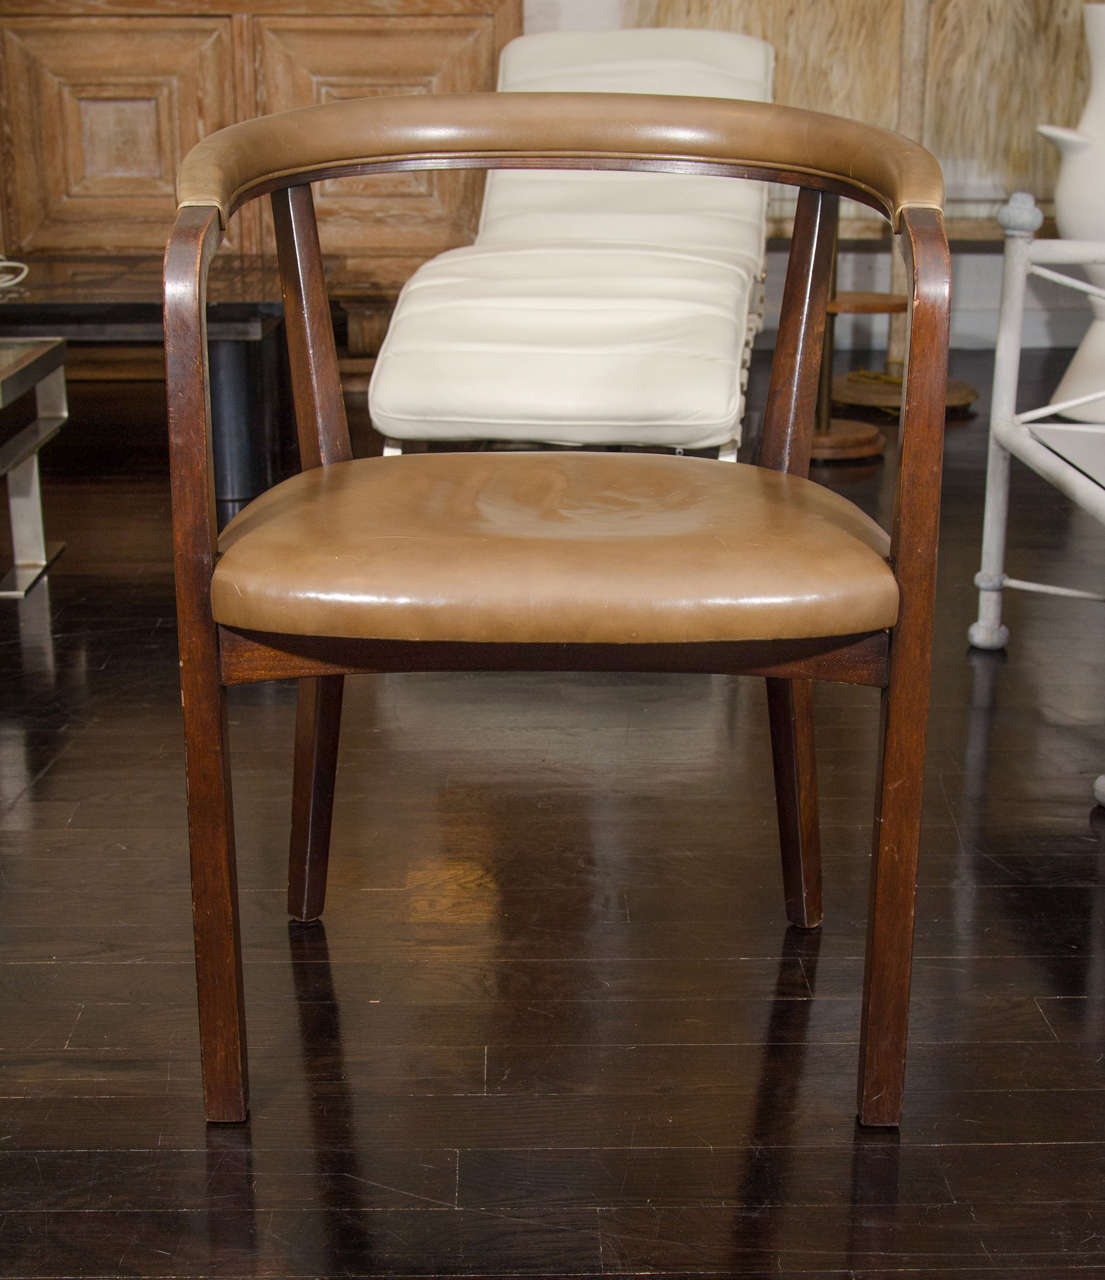 A Dunbar arm chair with mahogany frame and olive leather.
A great chair for a dressing table or desk.